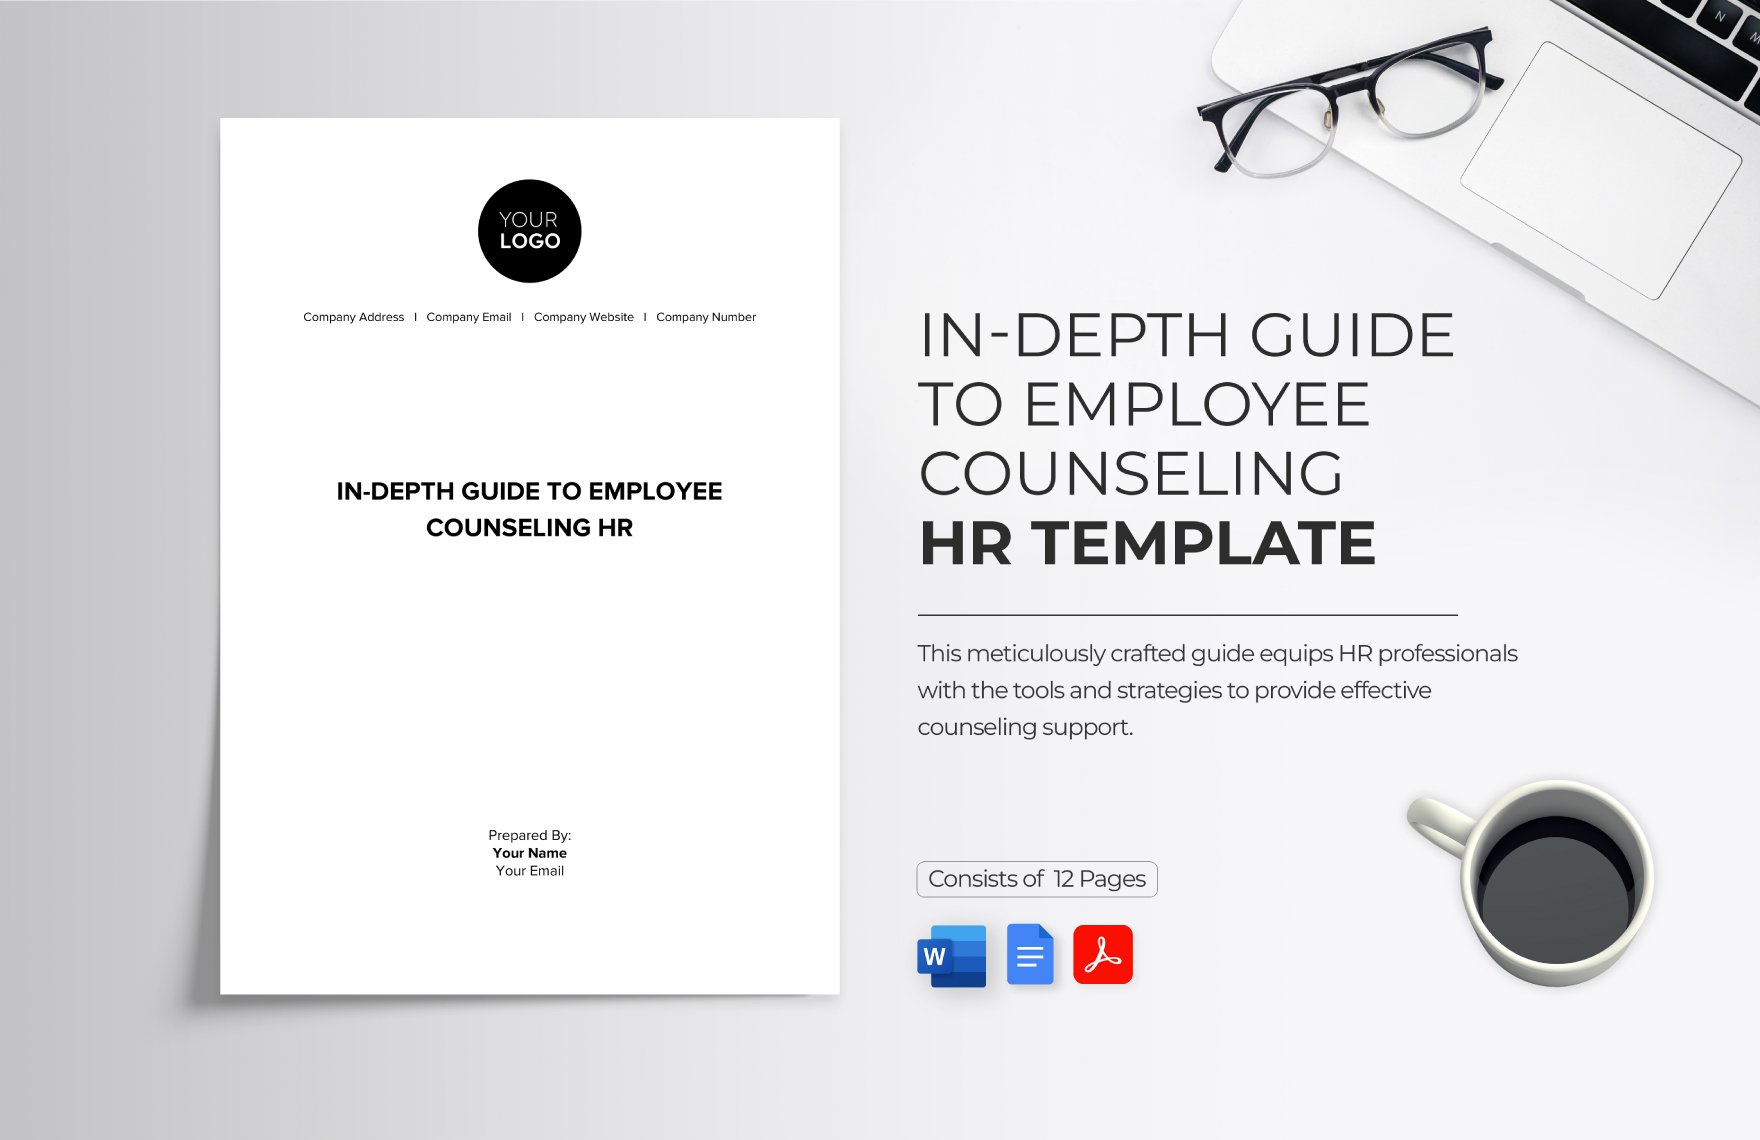 In-depth Guide to Employee Counseling HR Template